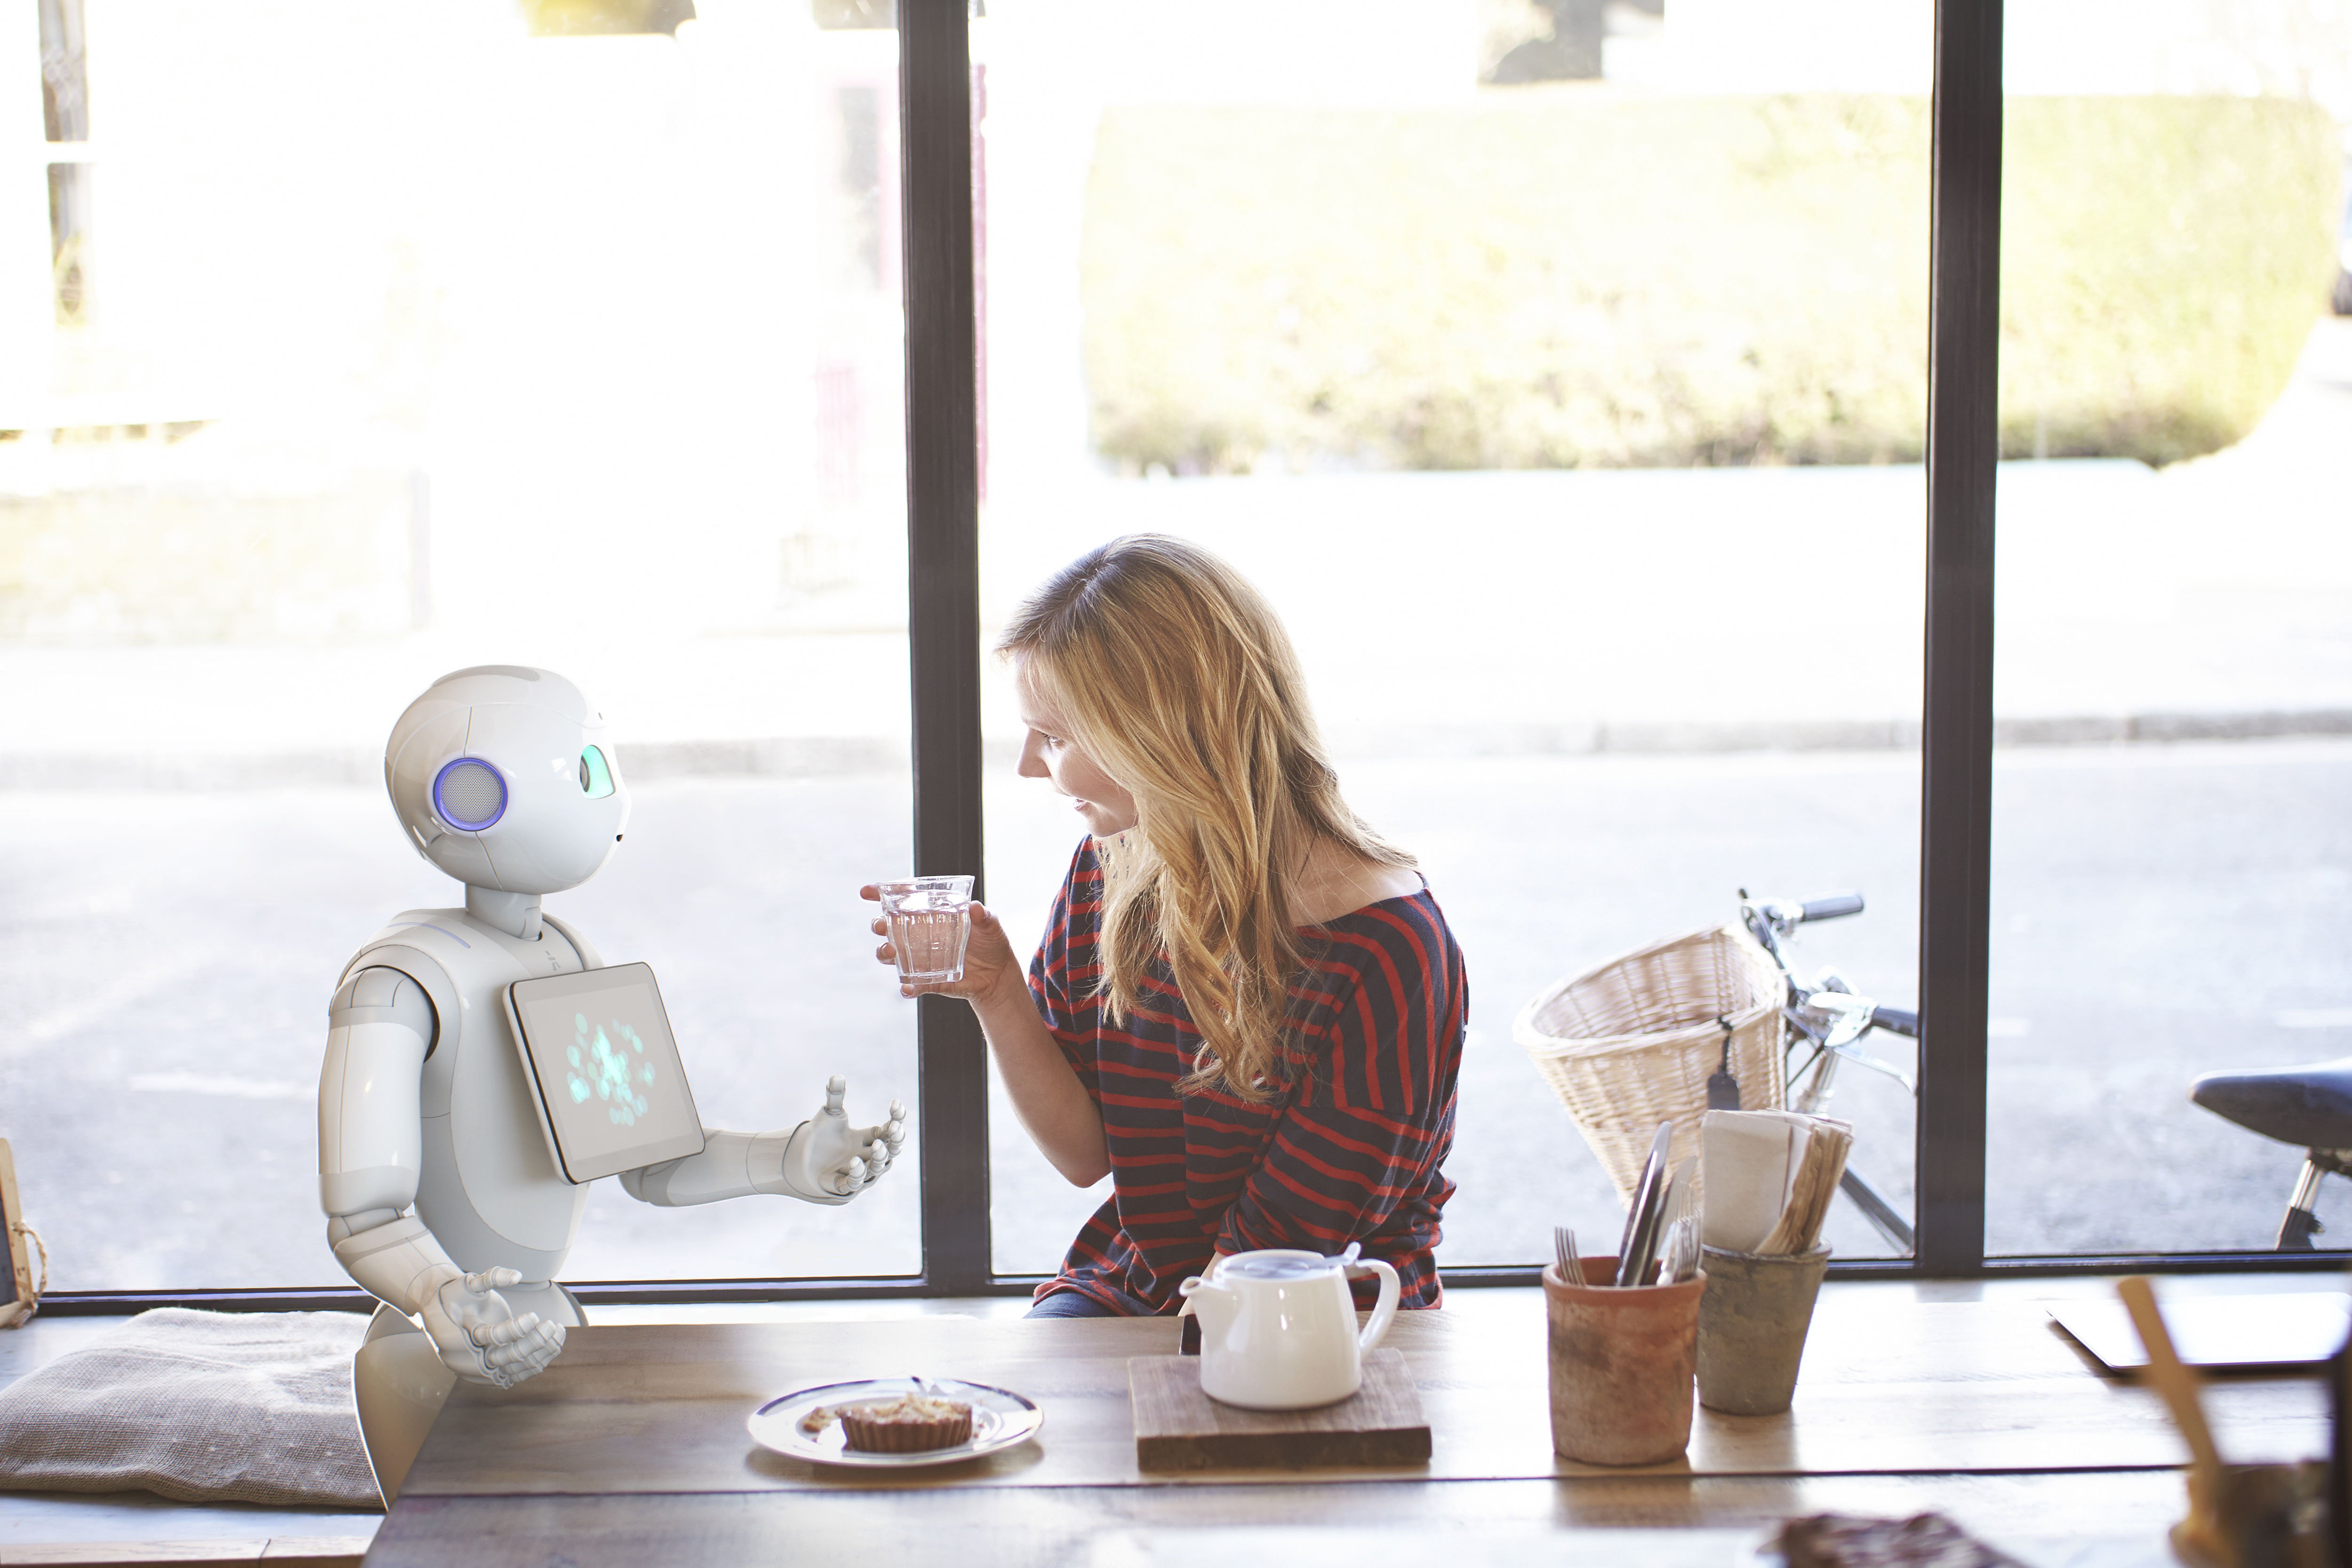 My Experience with Pepper, The Learning Robot That Reads Human Emotion